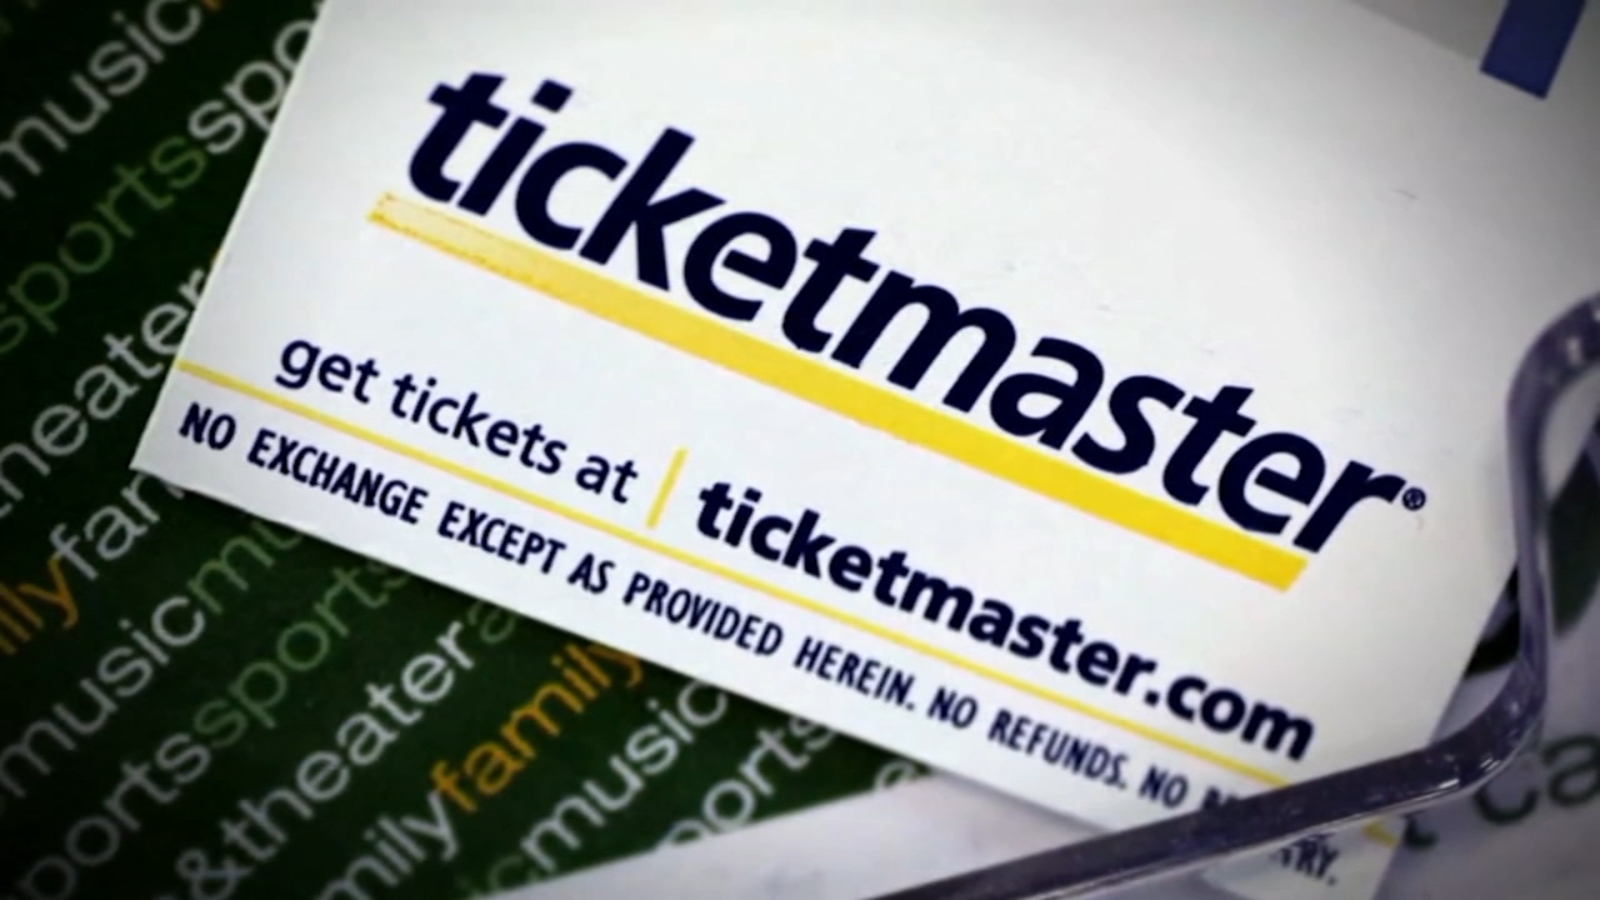 Assembly Bill 2808: California lawmaker Buffy Wicks takes on Ticketmaster; hopes to lower concerts, sporting events ticket prices [Video]